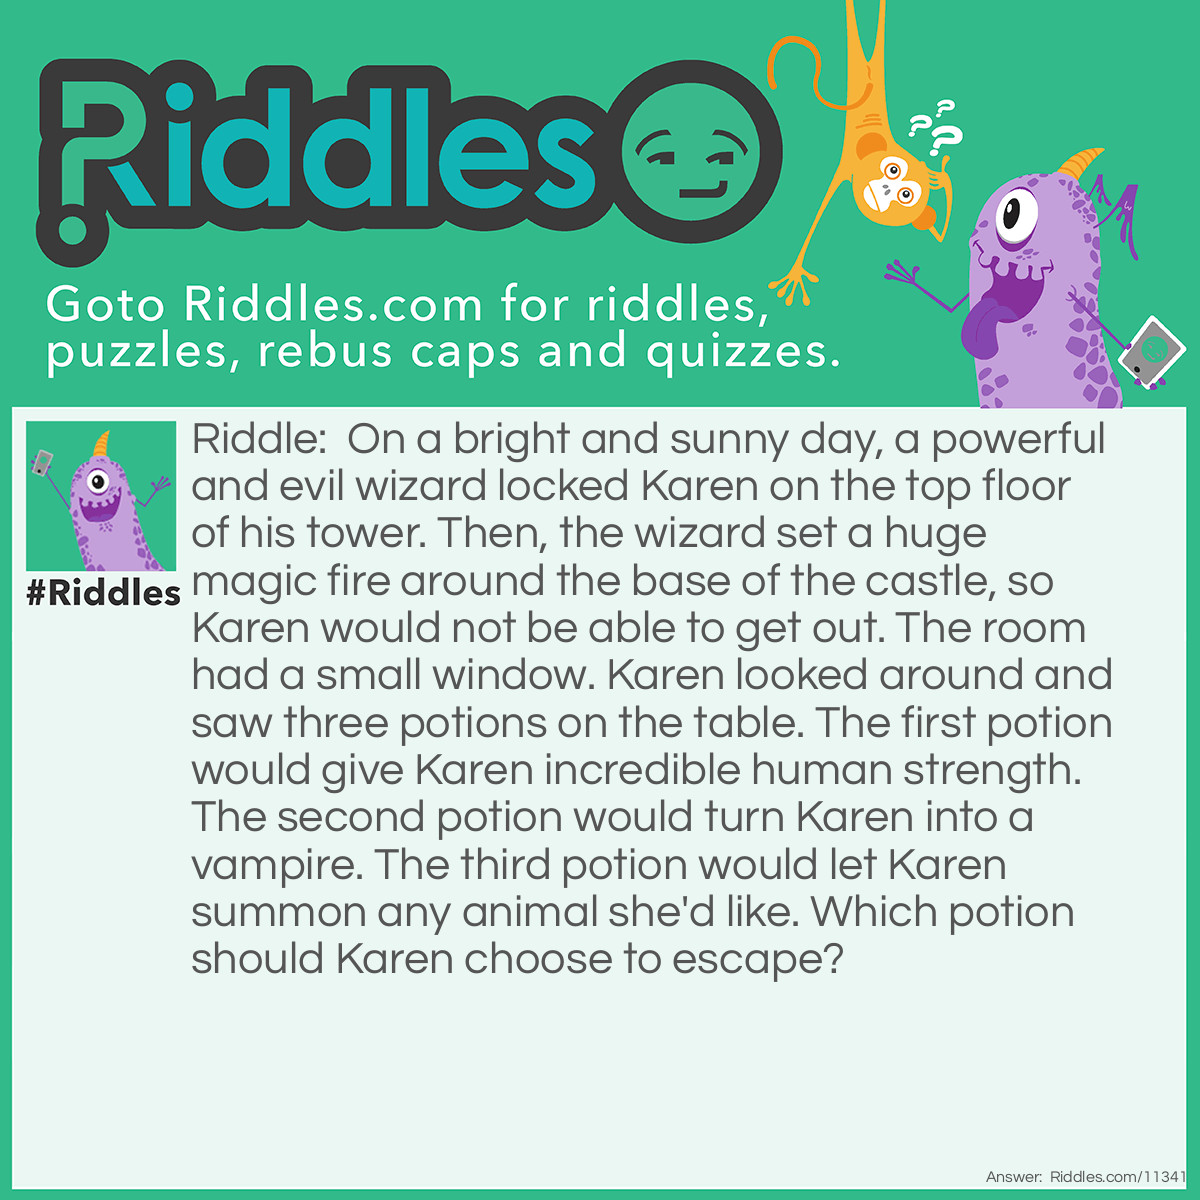 Riddle: On a bright and sunny day, a powerful and evil wizard locked Karen on the top floor of his tower. Then, the wizard set a huge magic fire around the base of the castle, so Karen would not be able to get out. The room had a small window. Karen looked around and saw three potions on the table. The first potion would give Karen incredible human strength. The second potion would turn Karen into a vampire. The third potion would let Karen summon any animal she'd like. Which potion should Karen choose to escape? Answer: Karen should choose the potion that allows her to turn into a vampire (the second potion). Even if she has all of the strength in the world, she wouldn't be able to do anything to the magic fire. And no animal can help Karen escape. If Karen turns into a vampire, though, she can transform into a bat and fly away through the window. And I know what you're thinking, but no–even though it's a sunny day, bats cannot die in the sun.